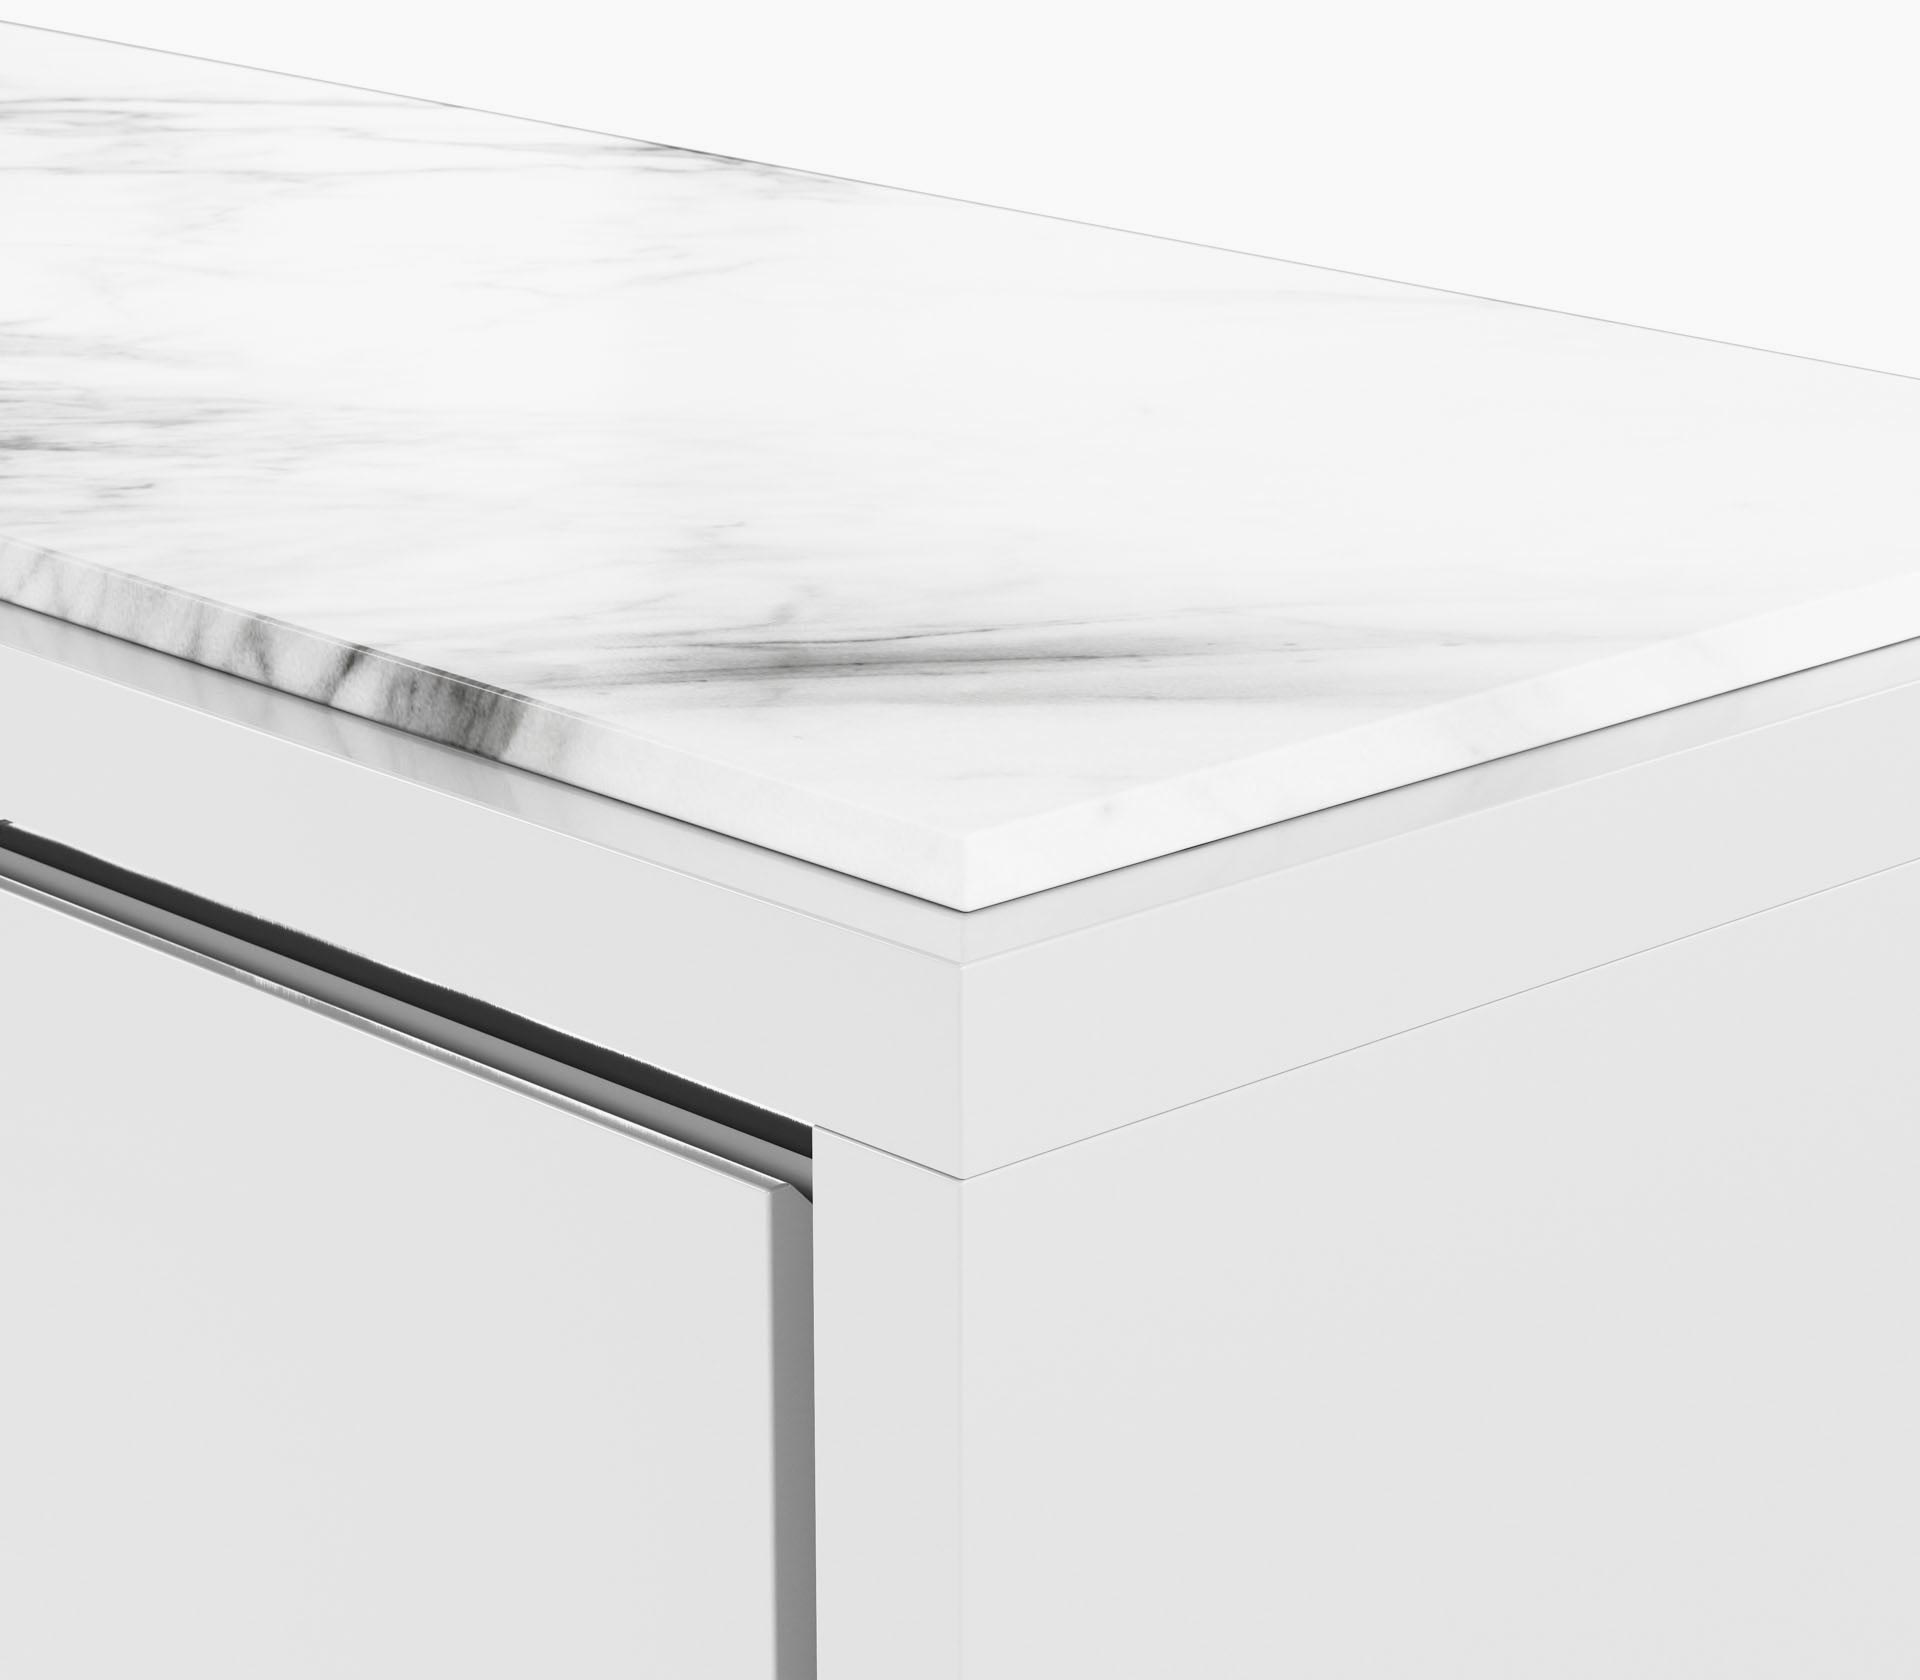 Edge detail on a Highline Fifty Credenza in white polyester with a white carrara marble top and polished chrome metal trim